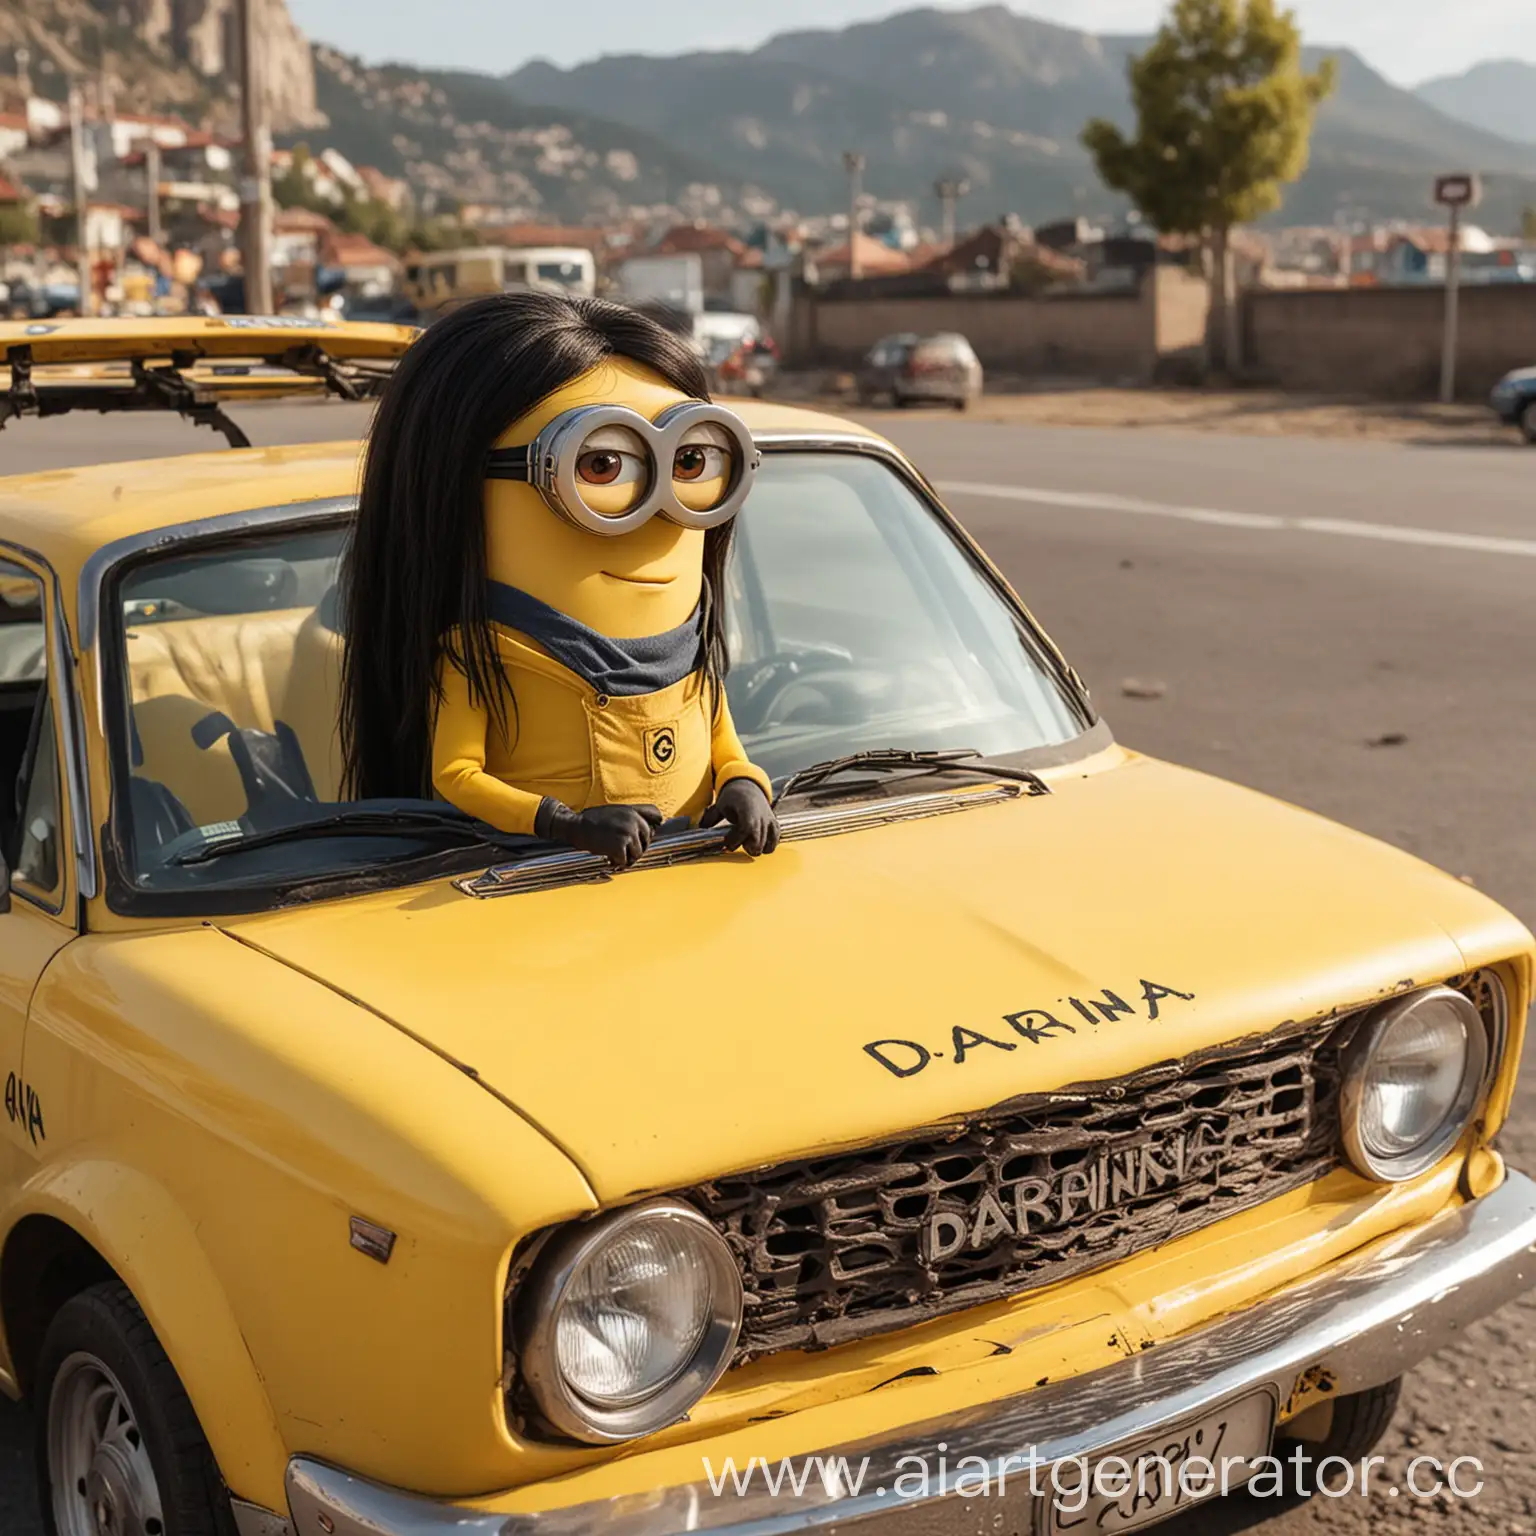 a minion with dark medium-length hair sits on the hood of a yellow car with the name Darina clearly written on it